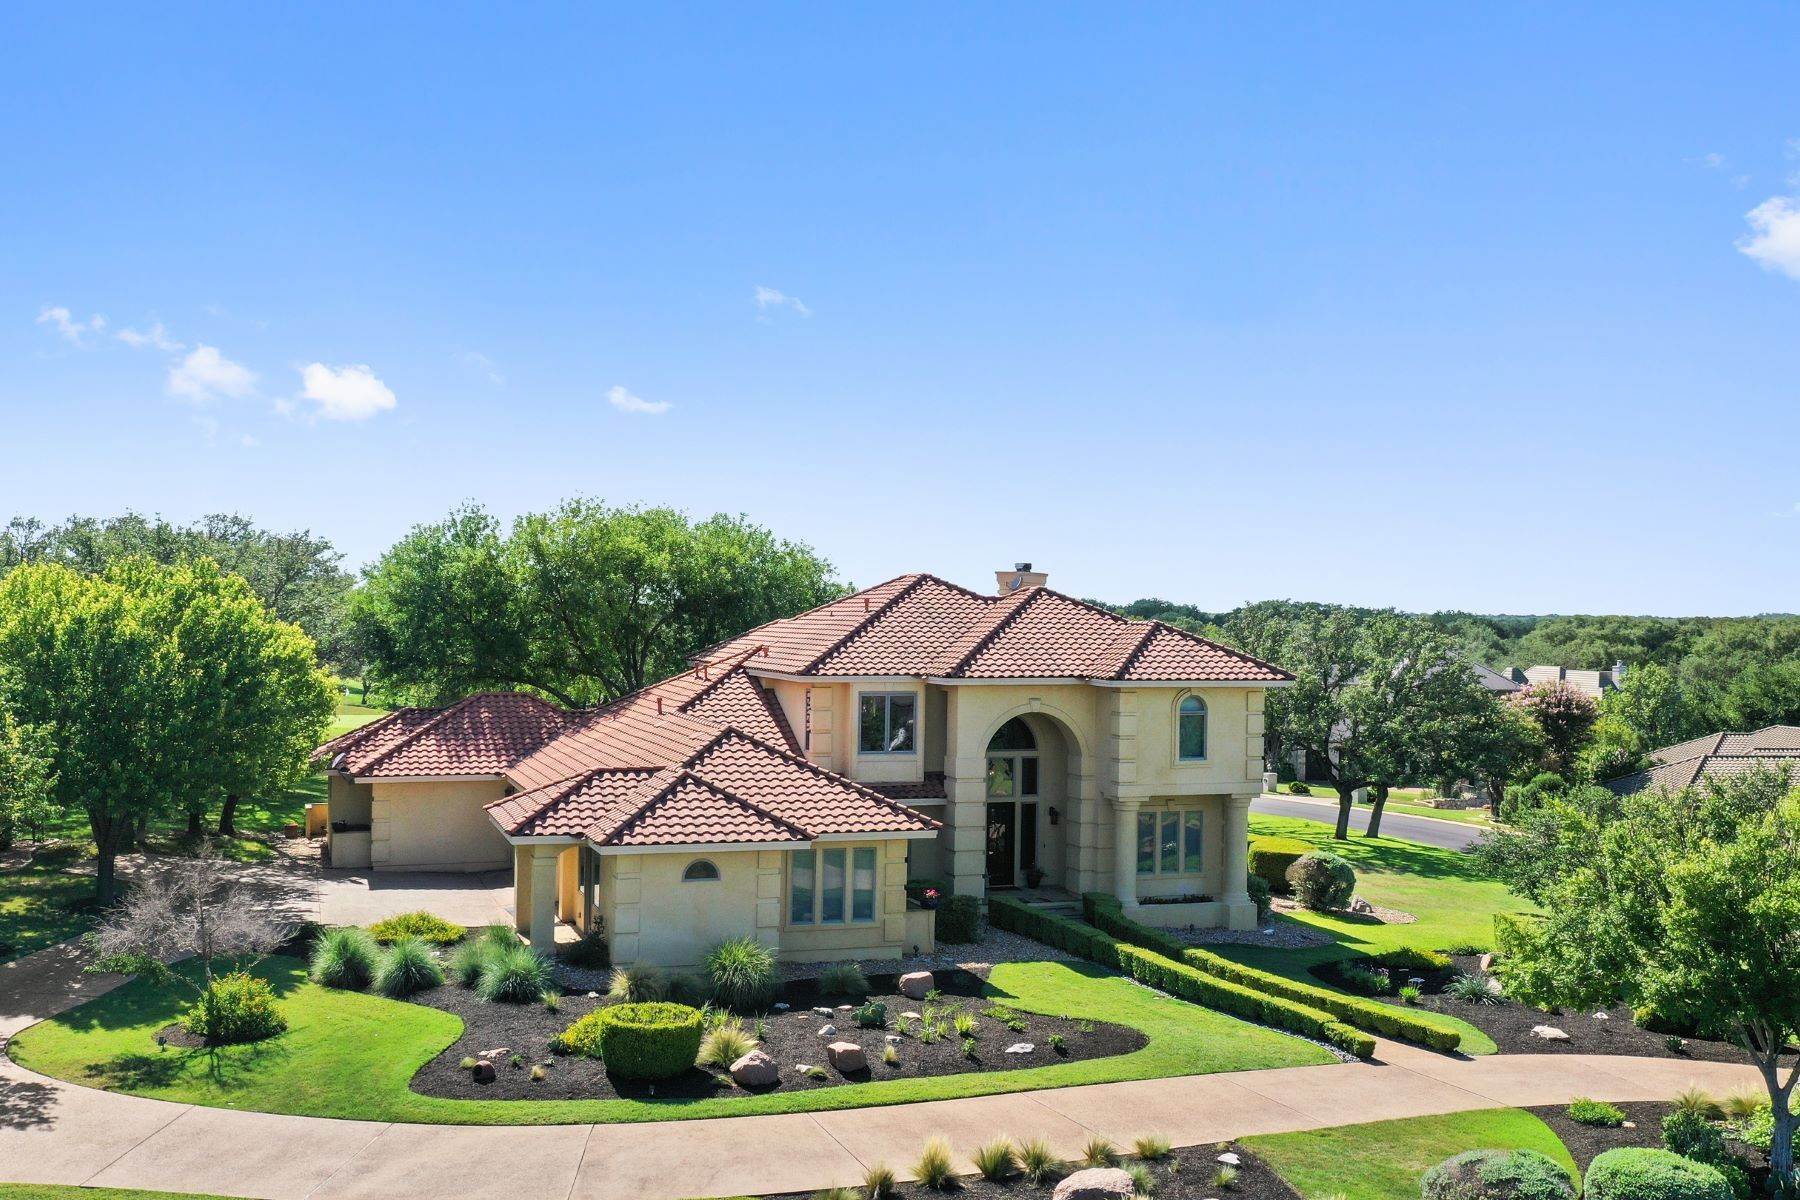 Single Family Homes for Sale at Stunning Mediterranean Home in Barton Creek Lakeside 2702 Keel Court Spicewood, Texas 78669 United States